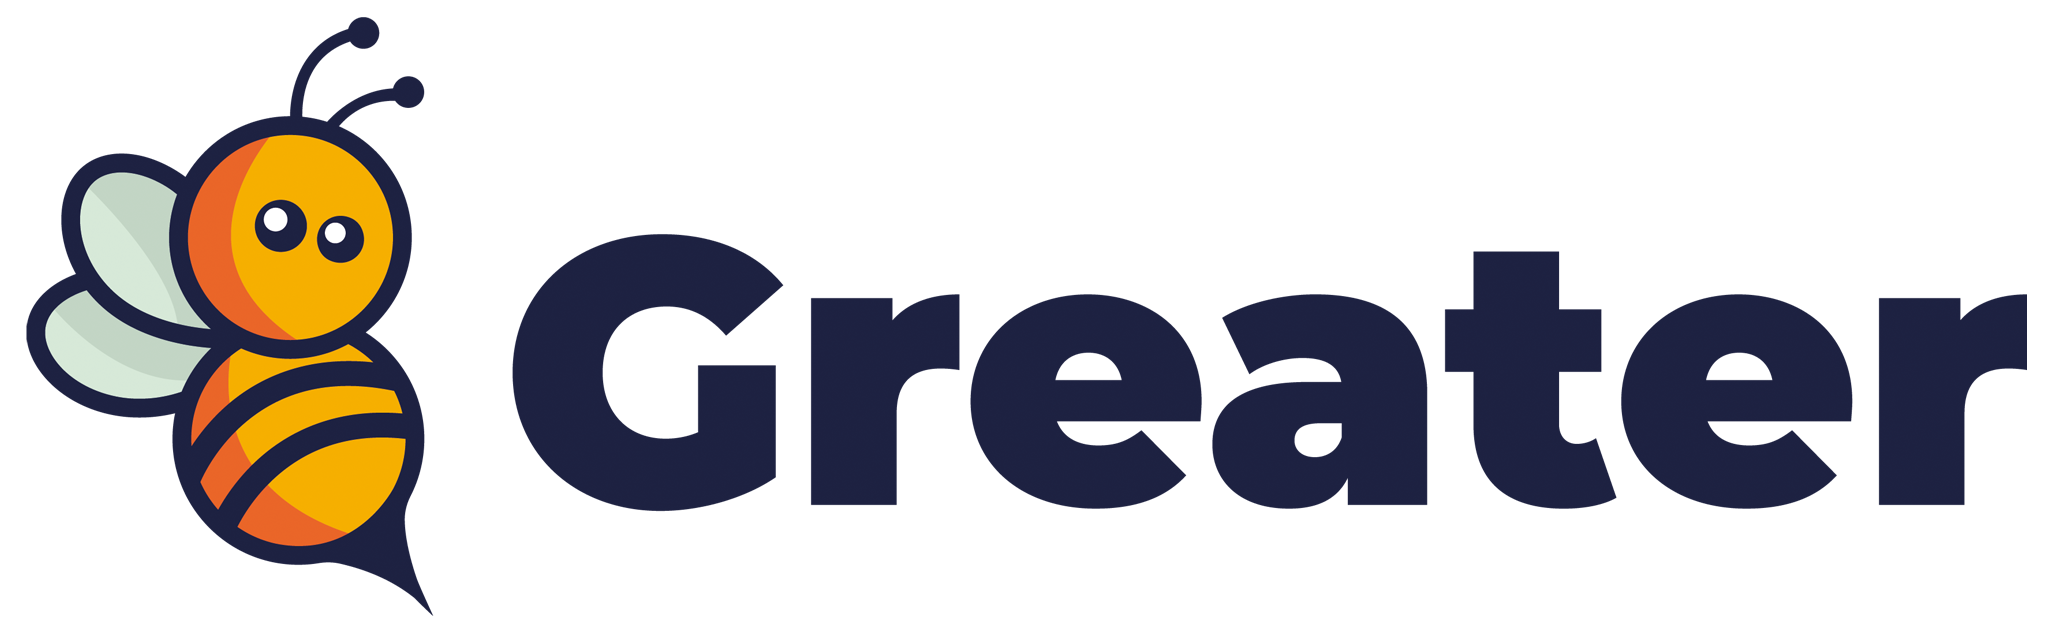 Greater